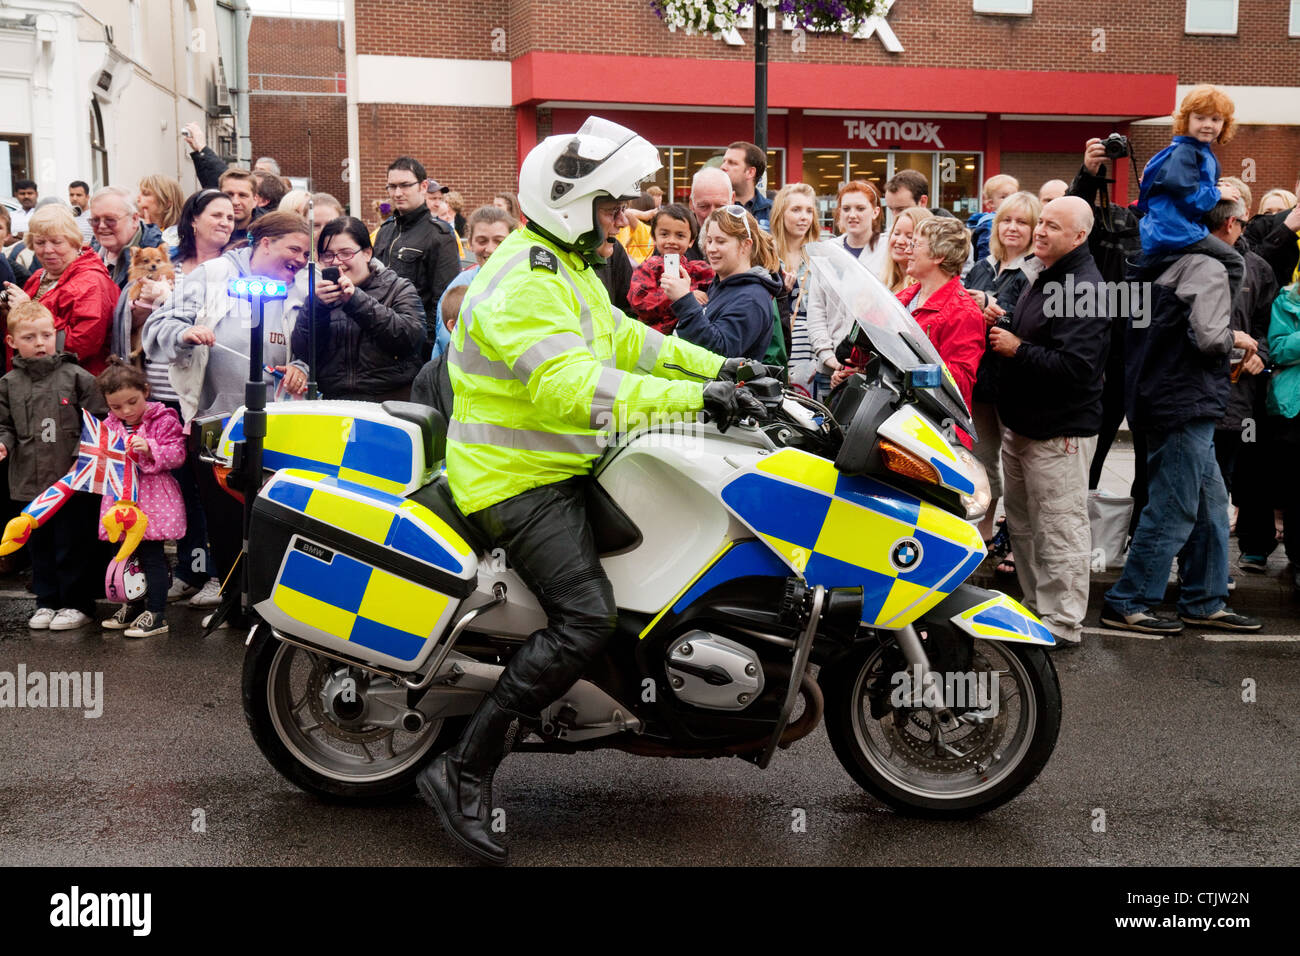 Policeman on motorcycle patrol, 2012 Olympic Torch relay, Newmarket Suffolk UK Stock Photo